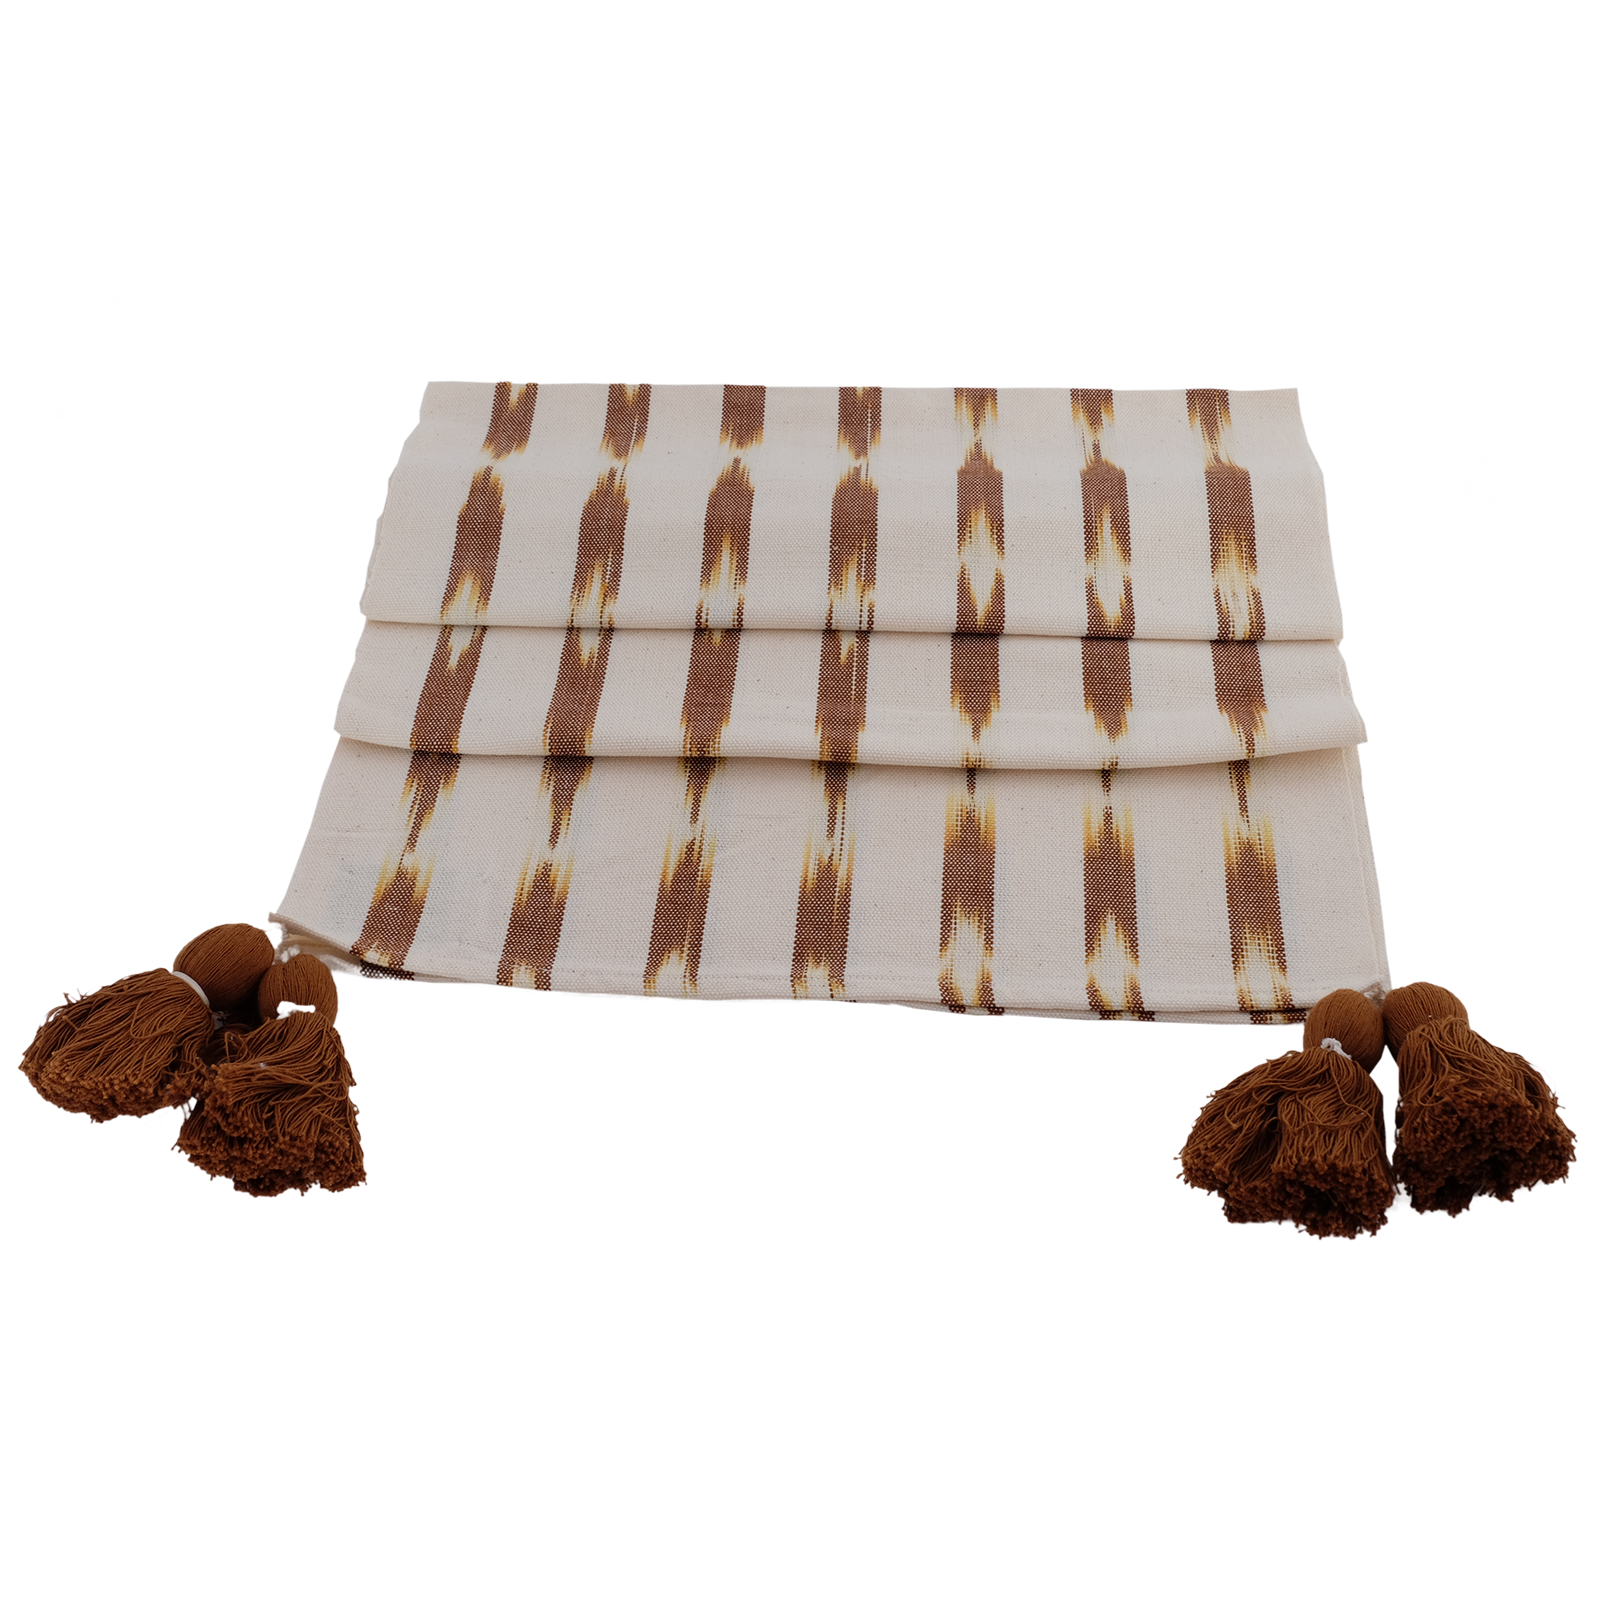 White and Nutmeg Serpentina Cotton Table Runner